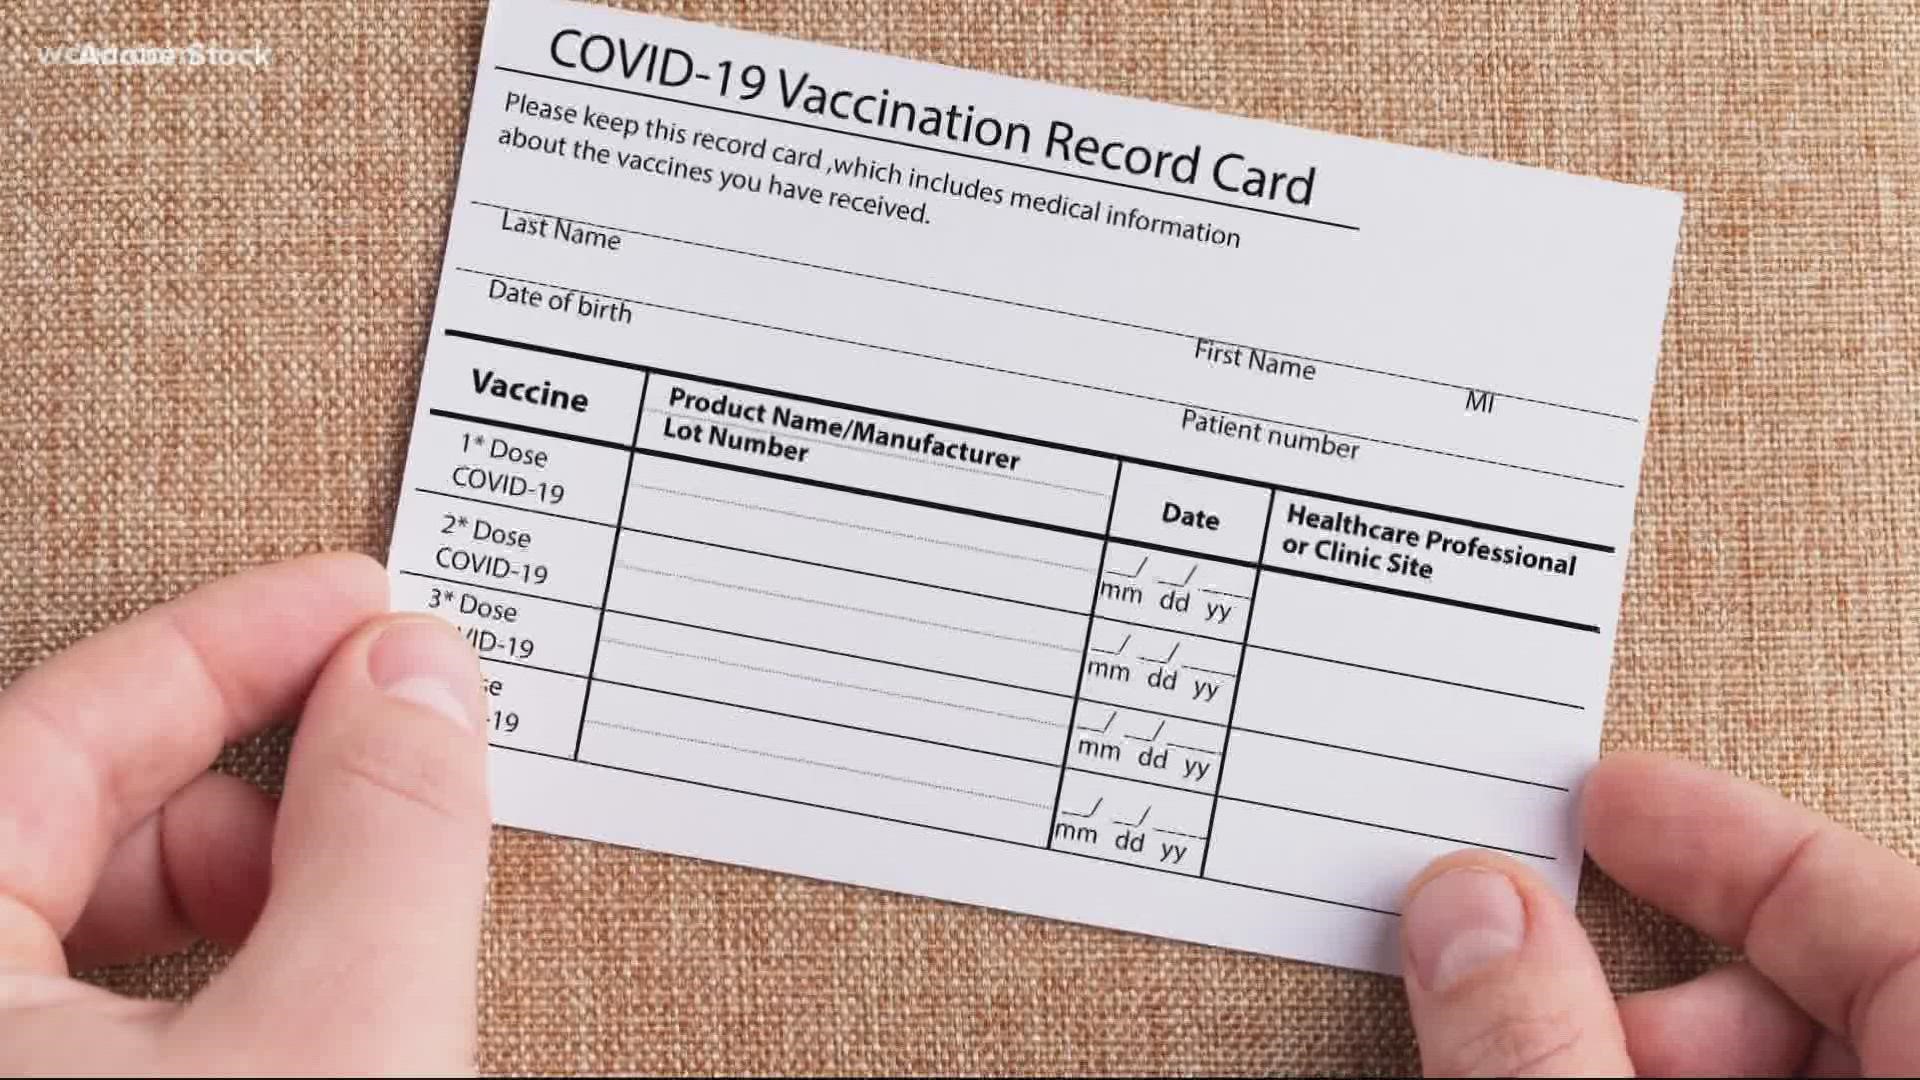 More and more places are requiring proof of vaccination. What if you got your shot, but lost your COVID-19 vaccine card?